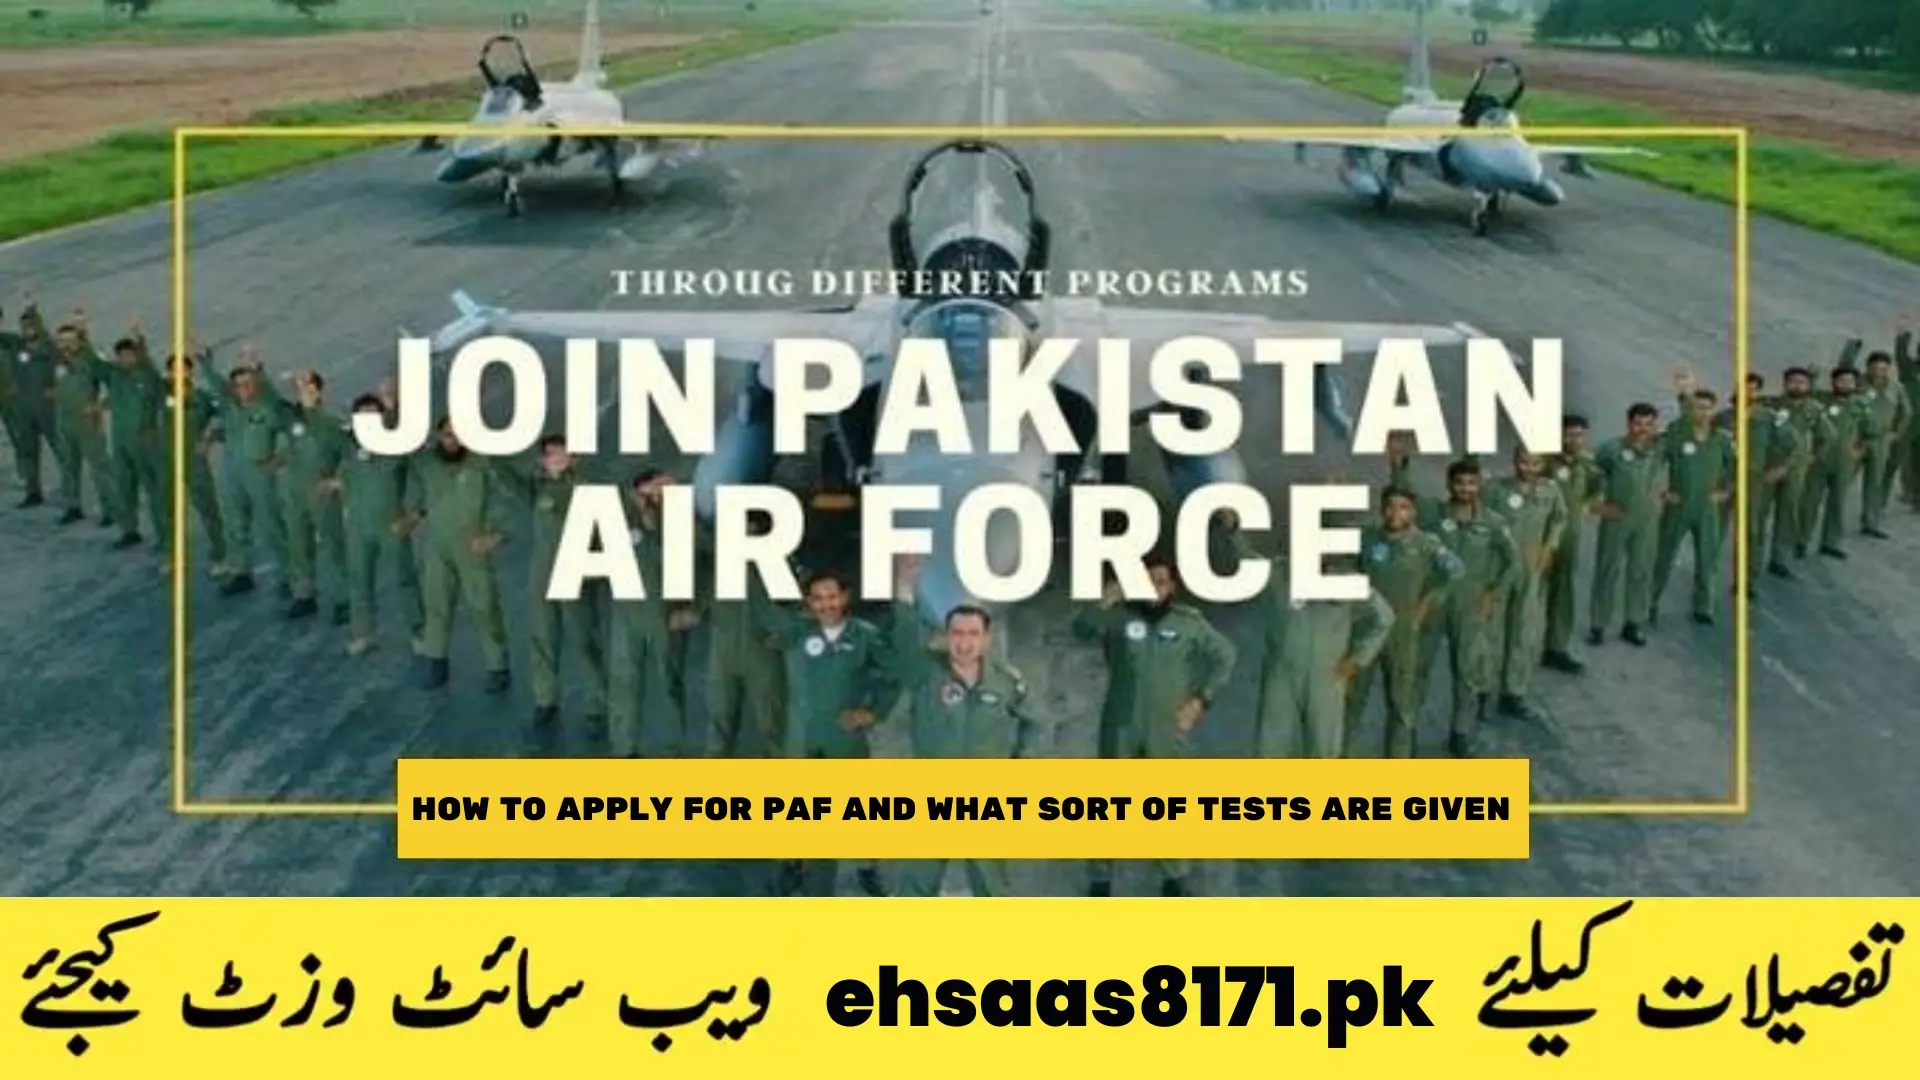 How to apply for PAF and what sort of tests are given